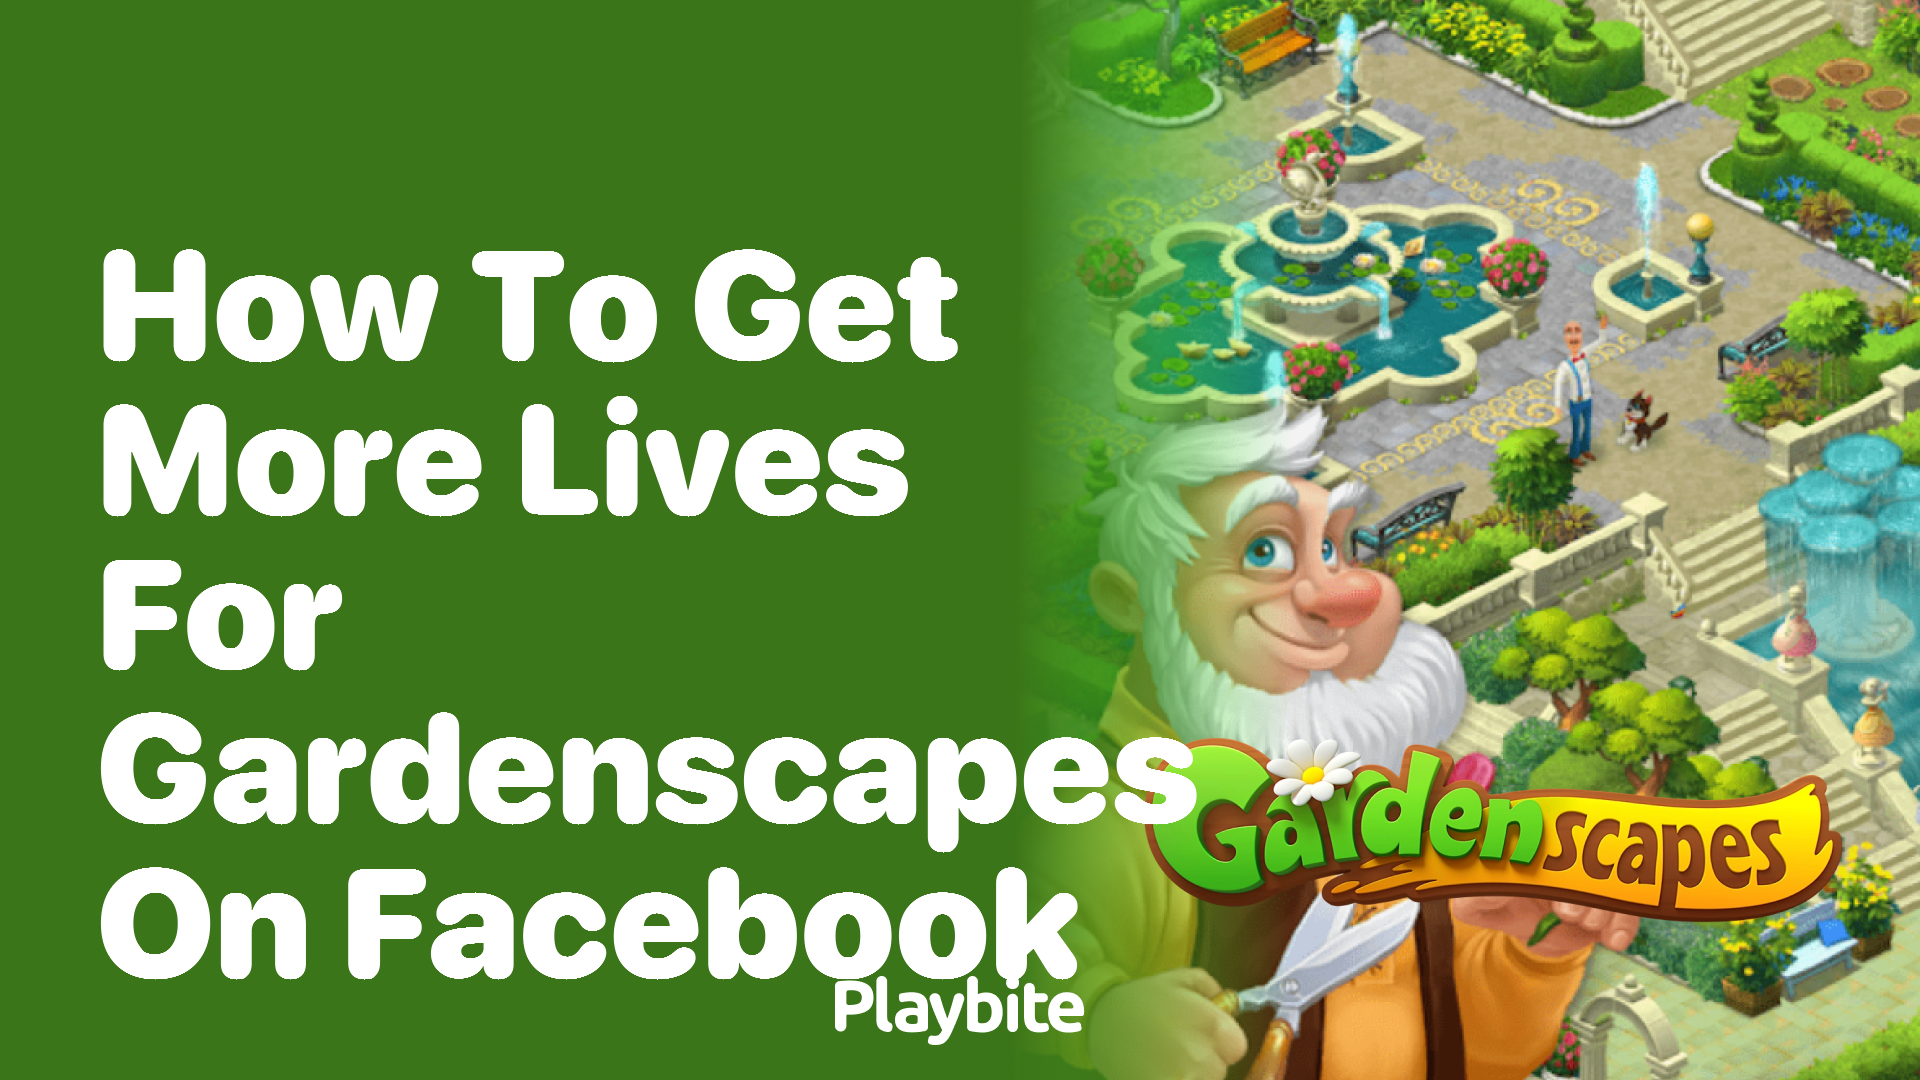 How to Get More Lives for Gardenscapes on Facebook